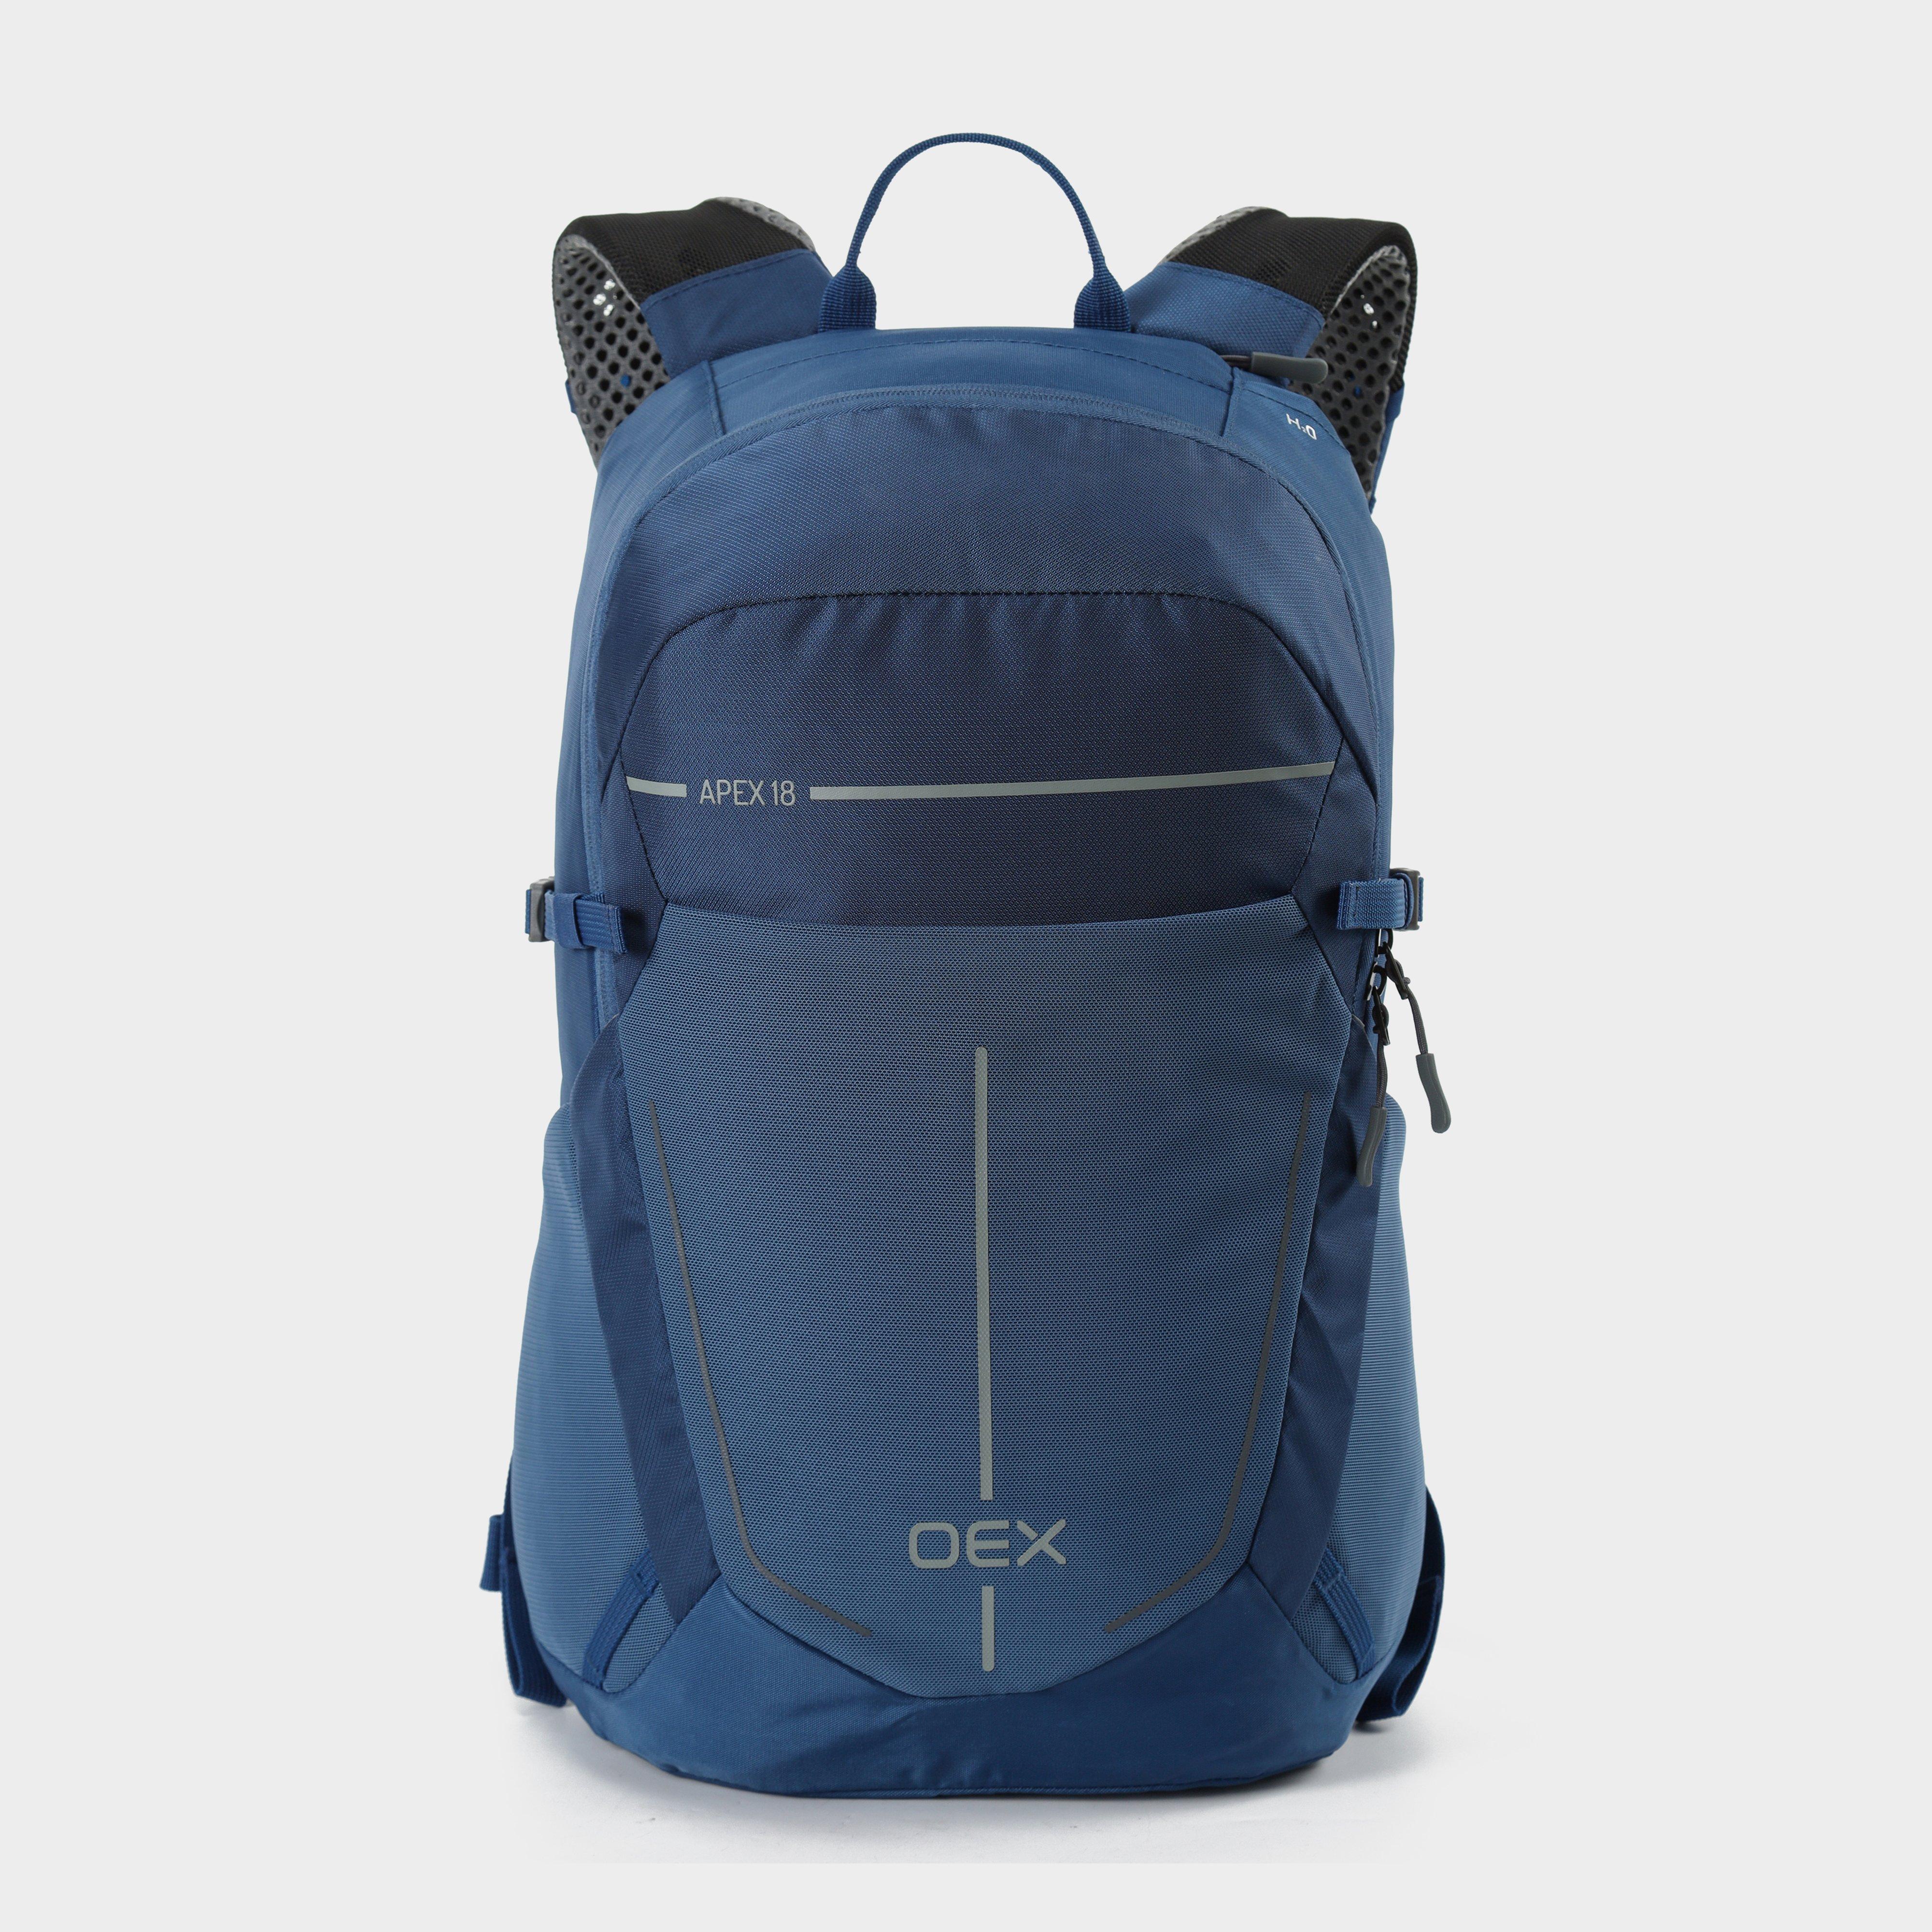 OEX Oex Apex 18L Backpack - Nvy, NVY